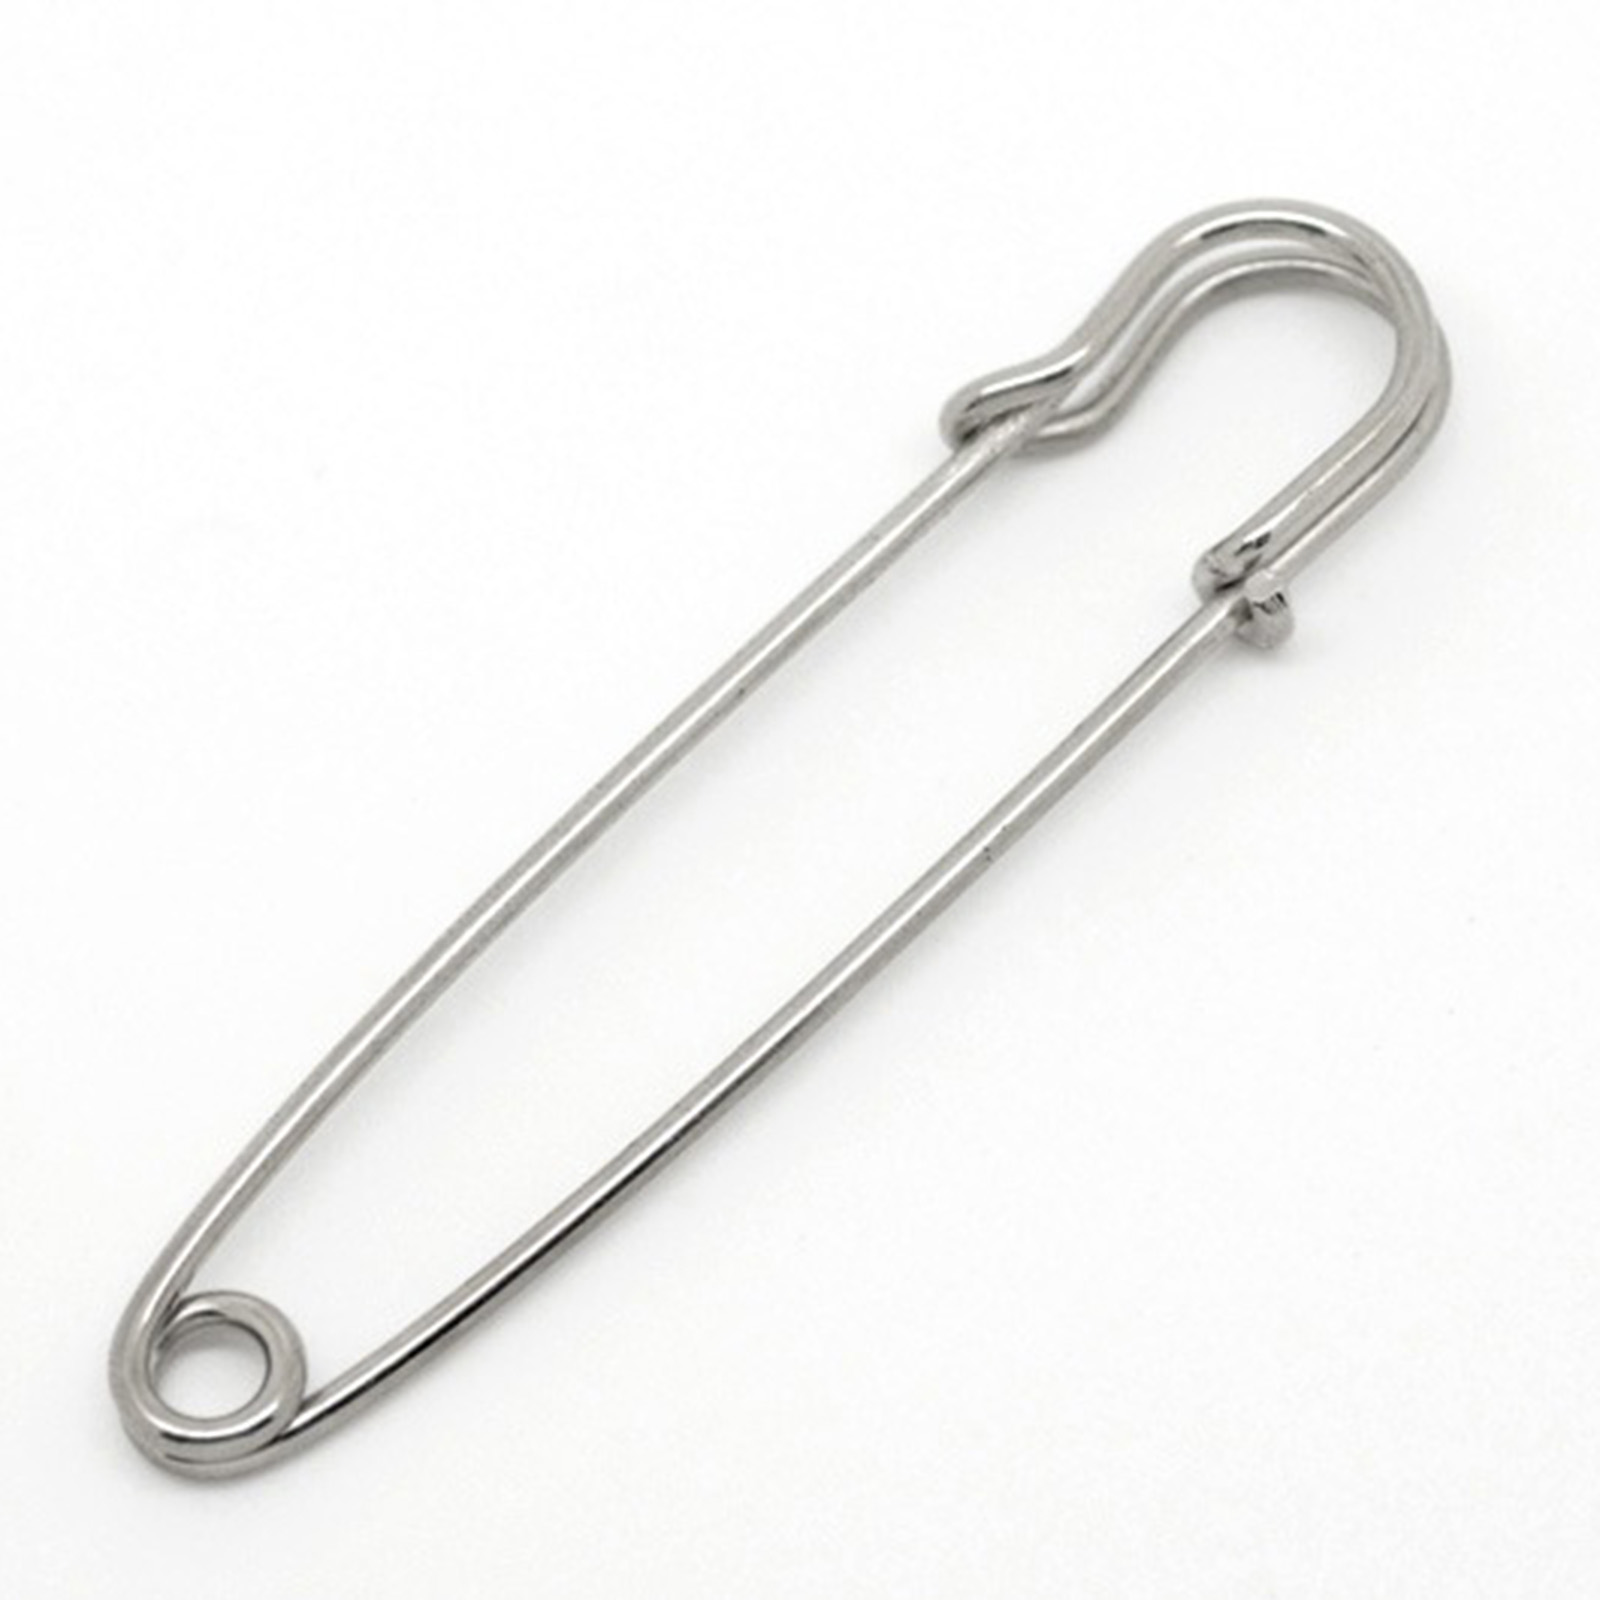 Picture of Iron Based Alloy Safety Pin Brooches Findings Silver Tone 7.4cm x 1.4cm, 1 Piece